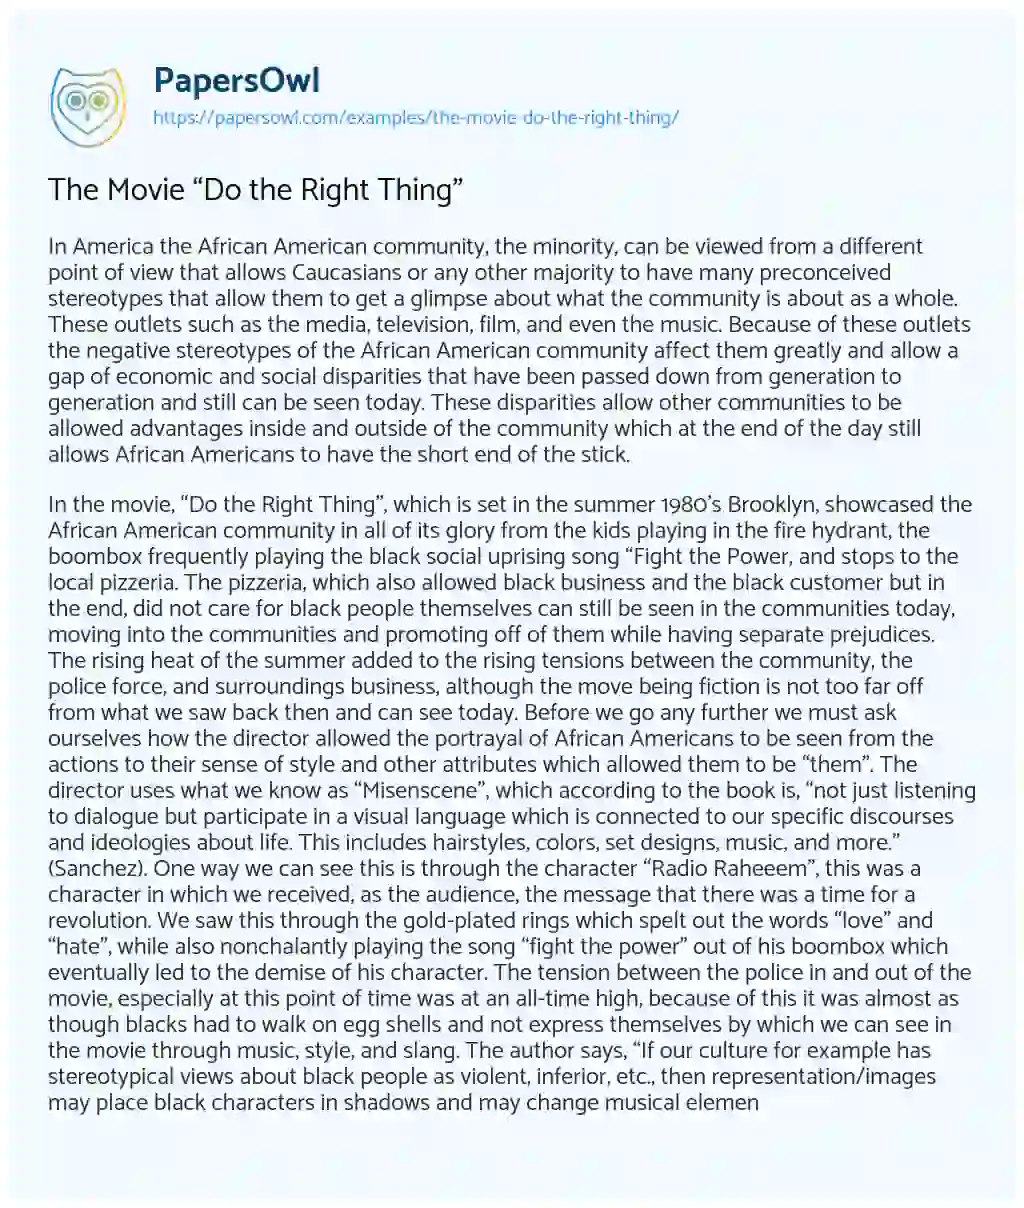 Essay on The Movie “Do the Right Thing”